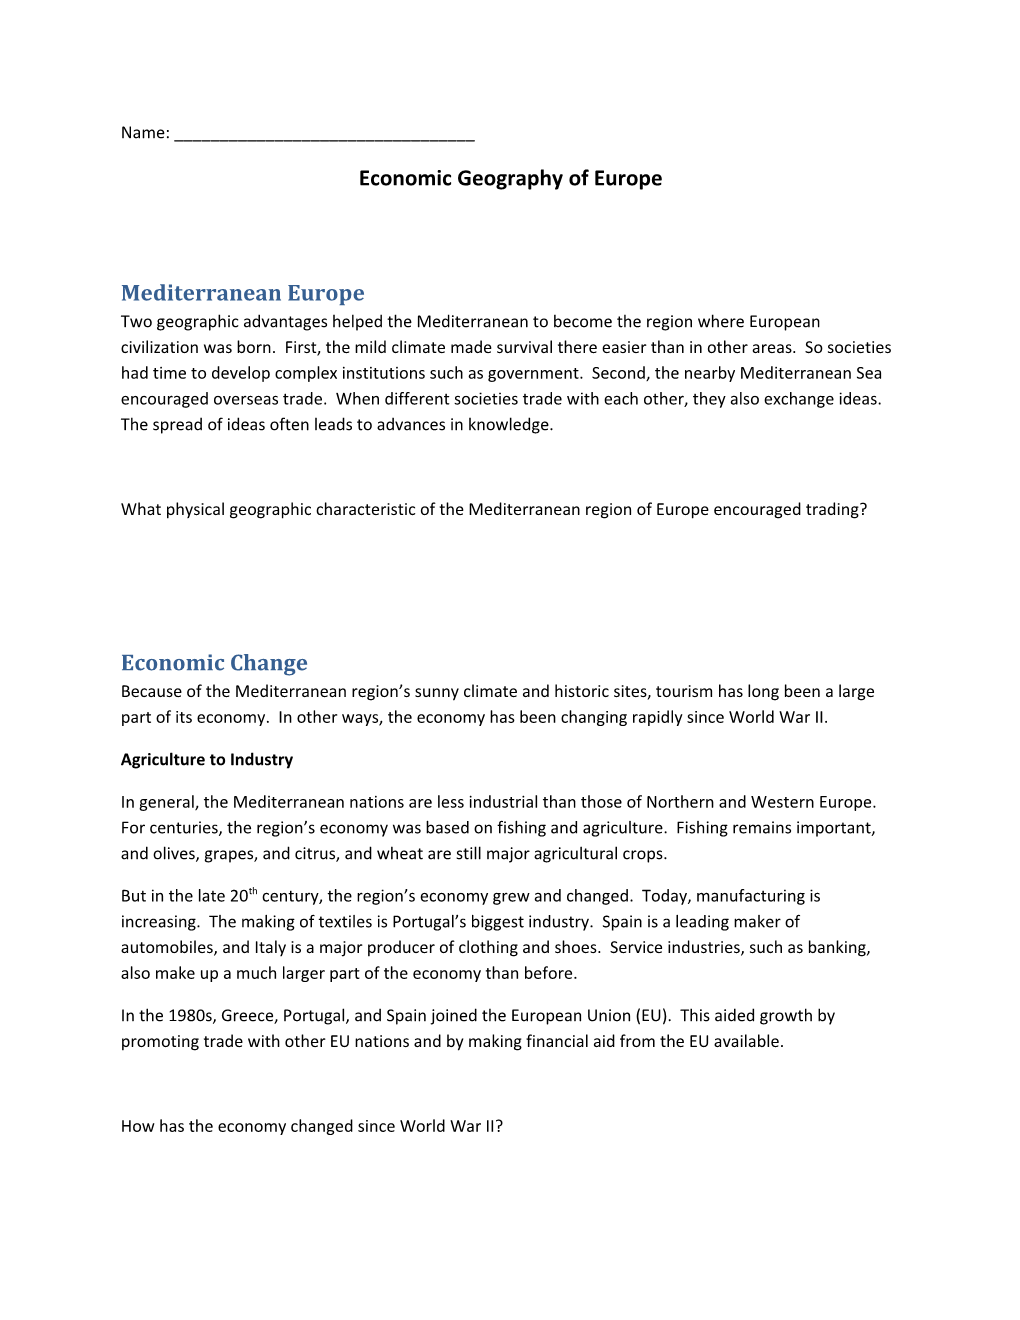 Economic Geography of Europe